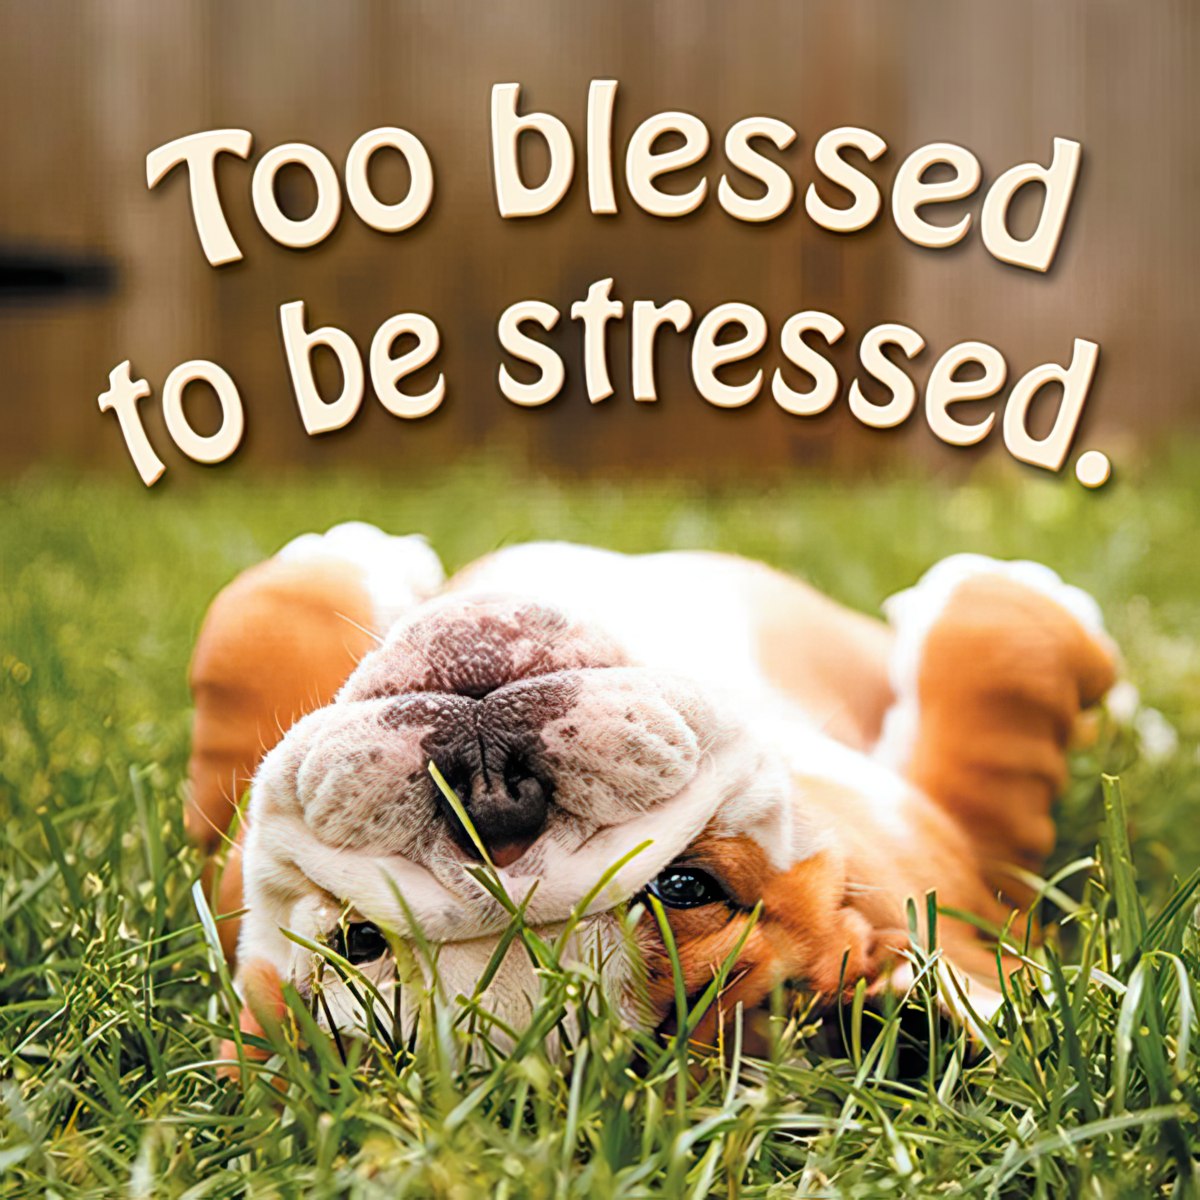 Too blessed to be stressed.